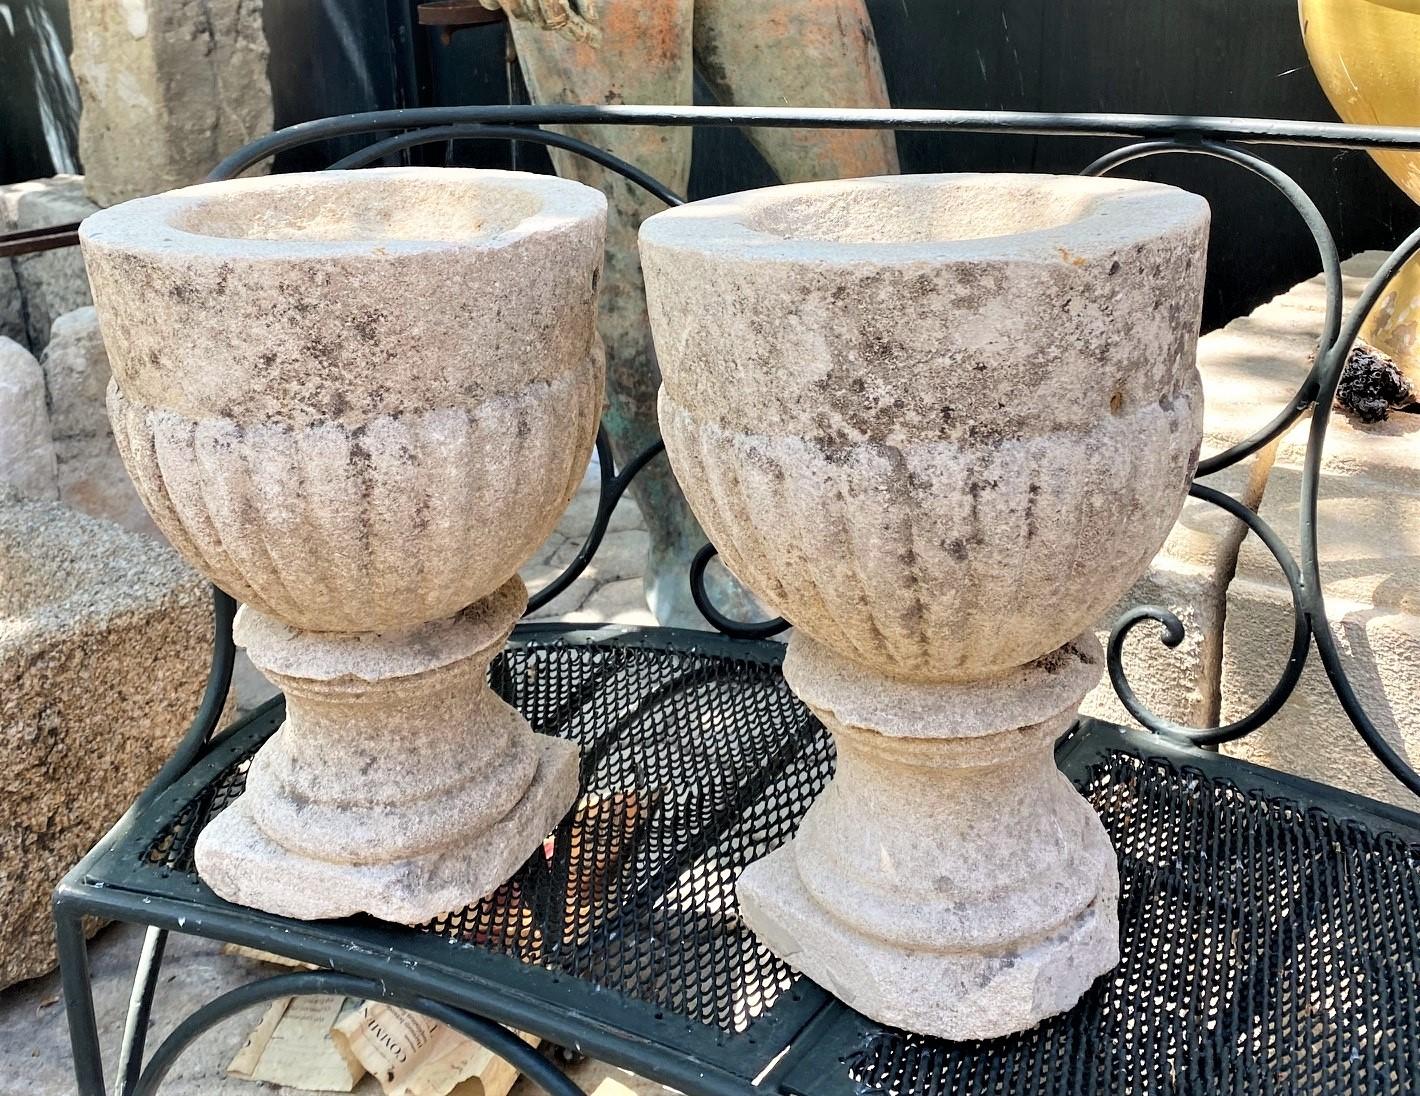 Pair 19th century hand carved stone finials urns vase shape to mount on garden post by a gate or simply using it as beautiful decorative element in an interior on a console or a garden table. The nicely carved Body and details. The elegance